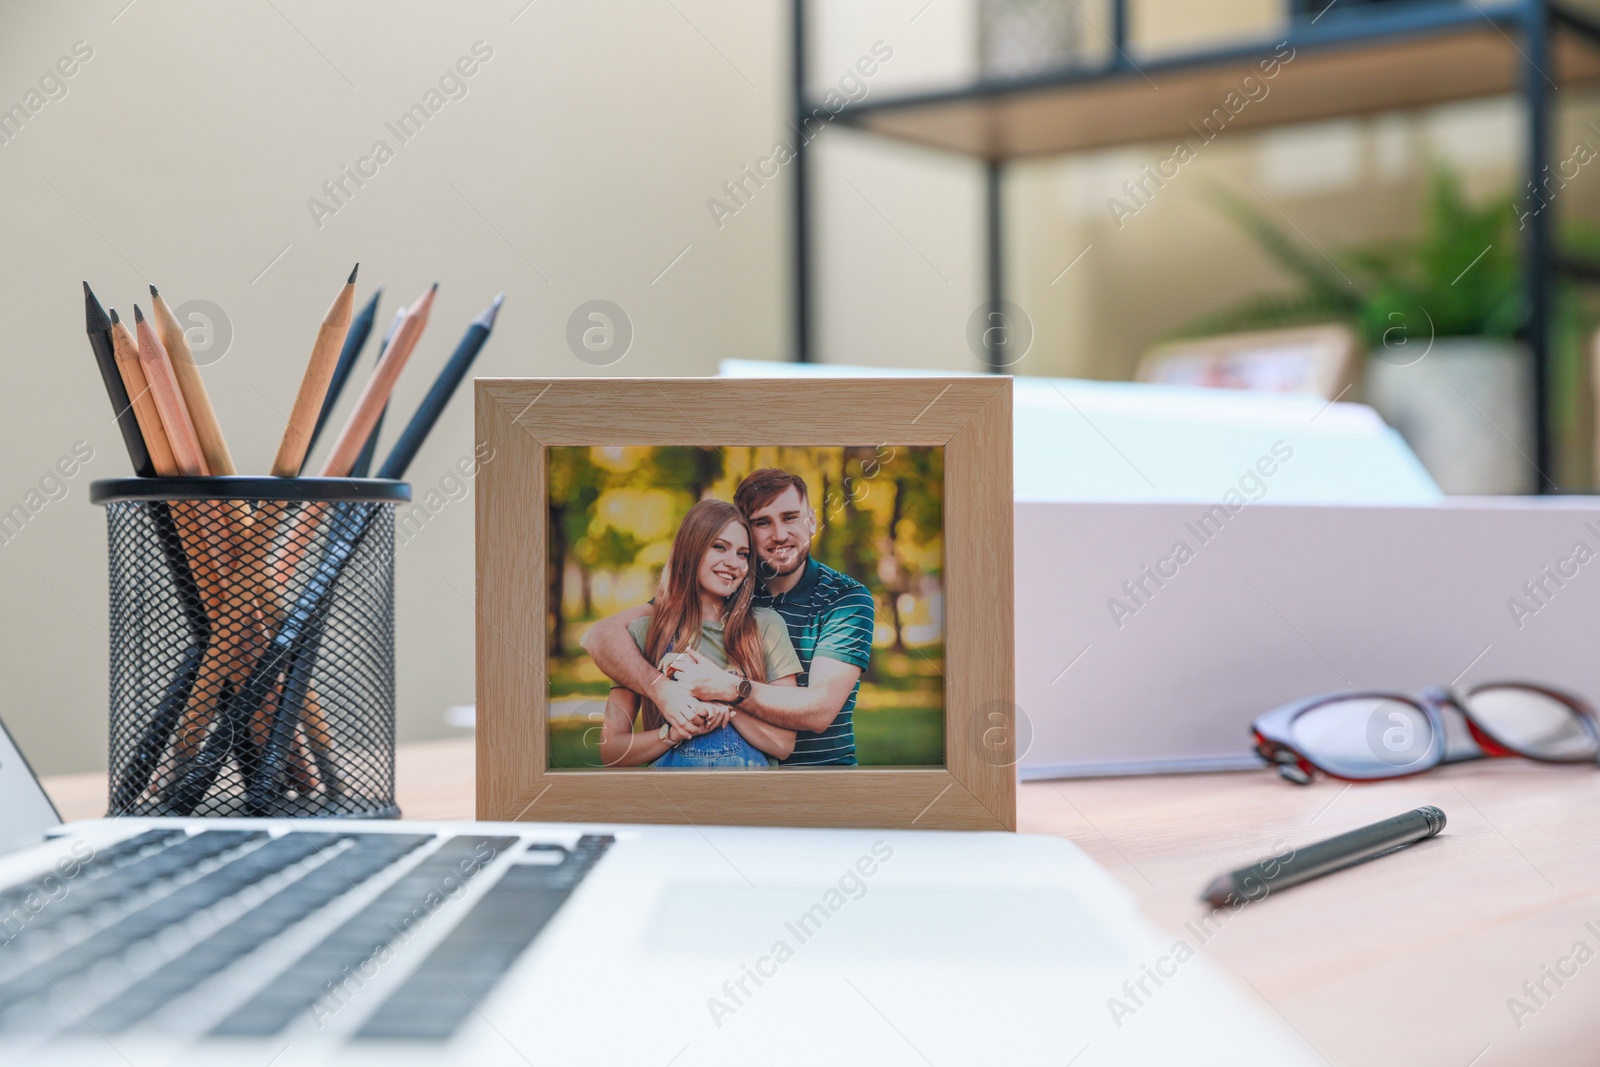 Photo of Framed photo of happy couple near laptop on wooden table in office